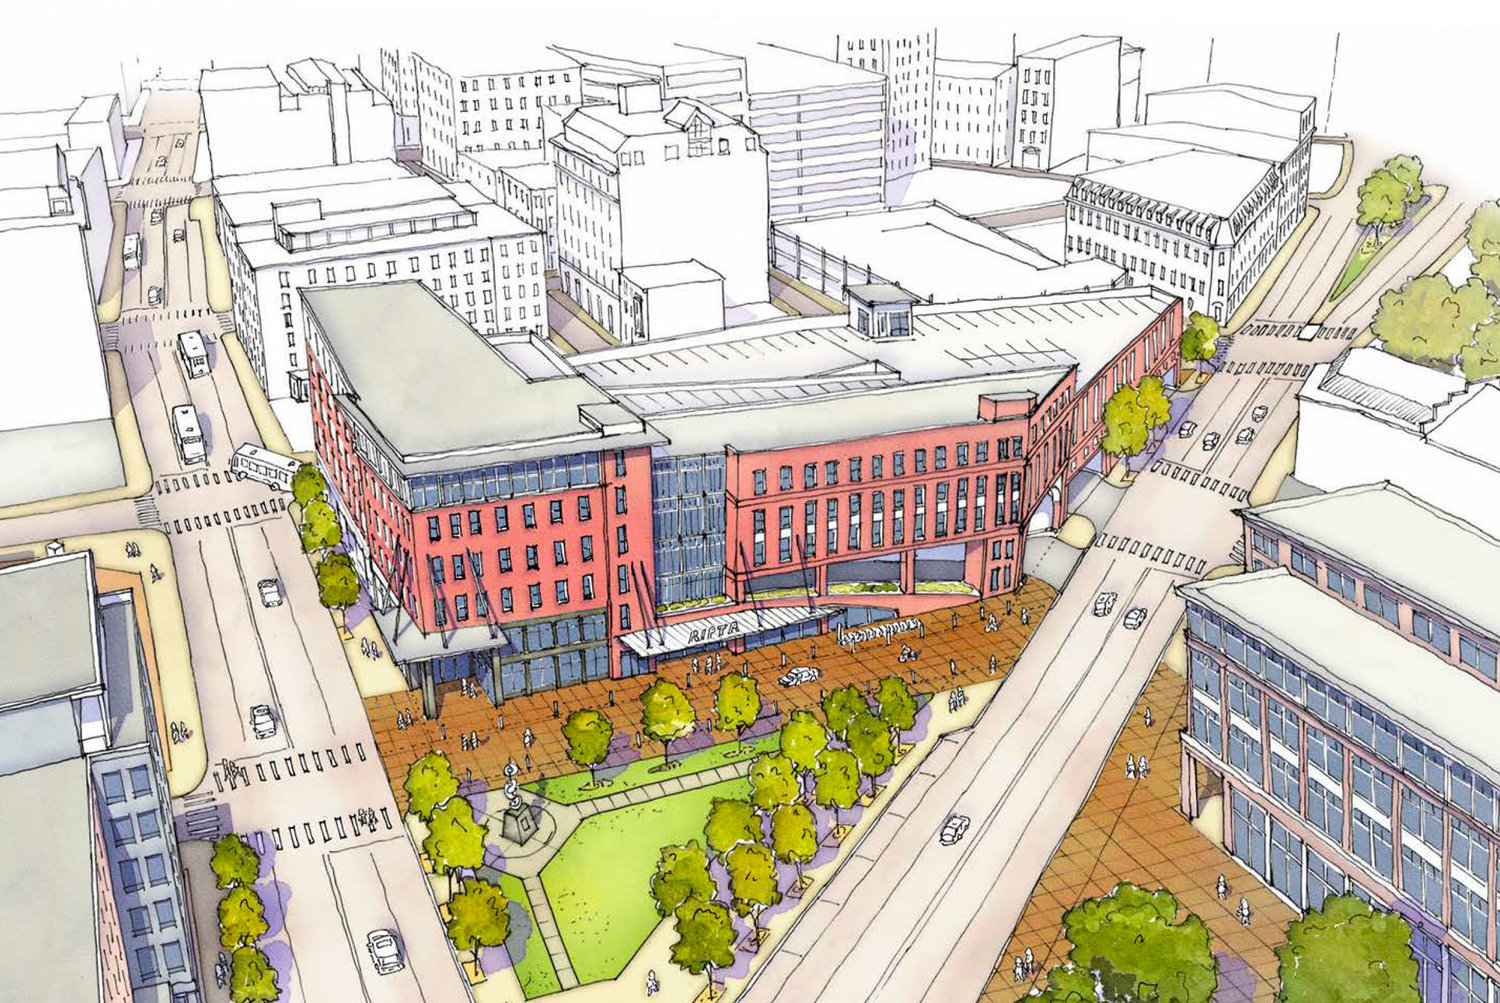 The proposed Innovation District Bus Transit Center on Dorrance Street